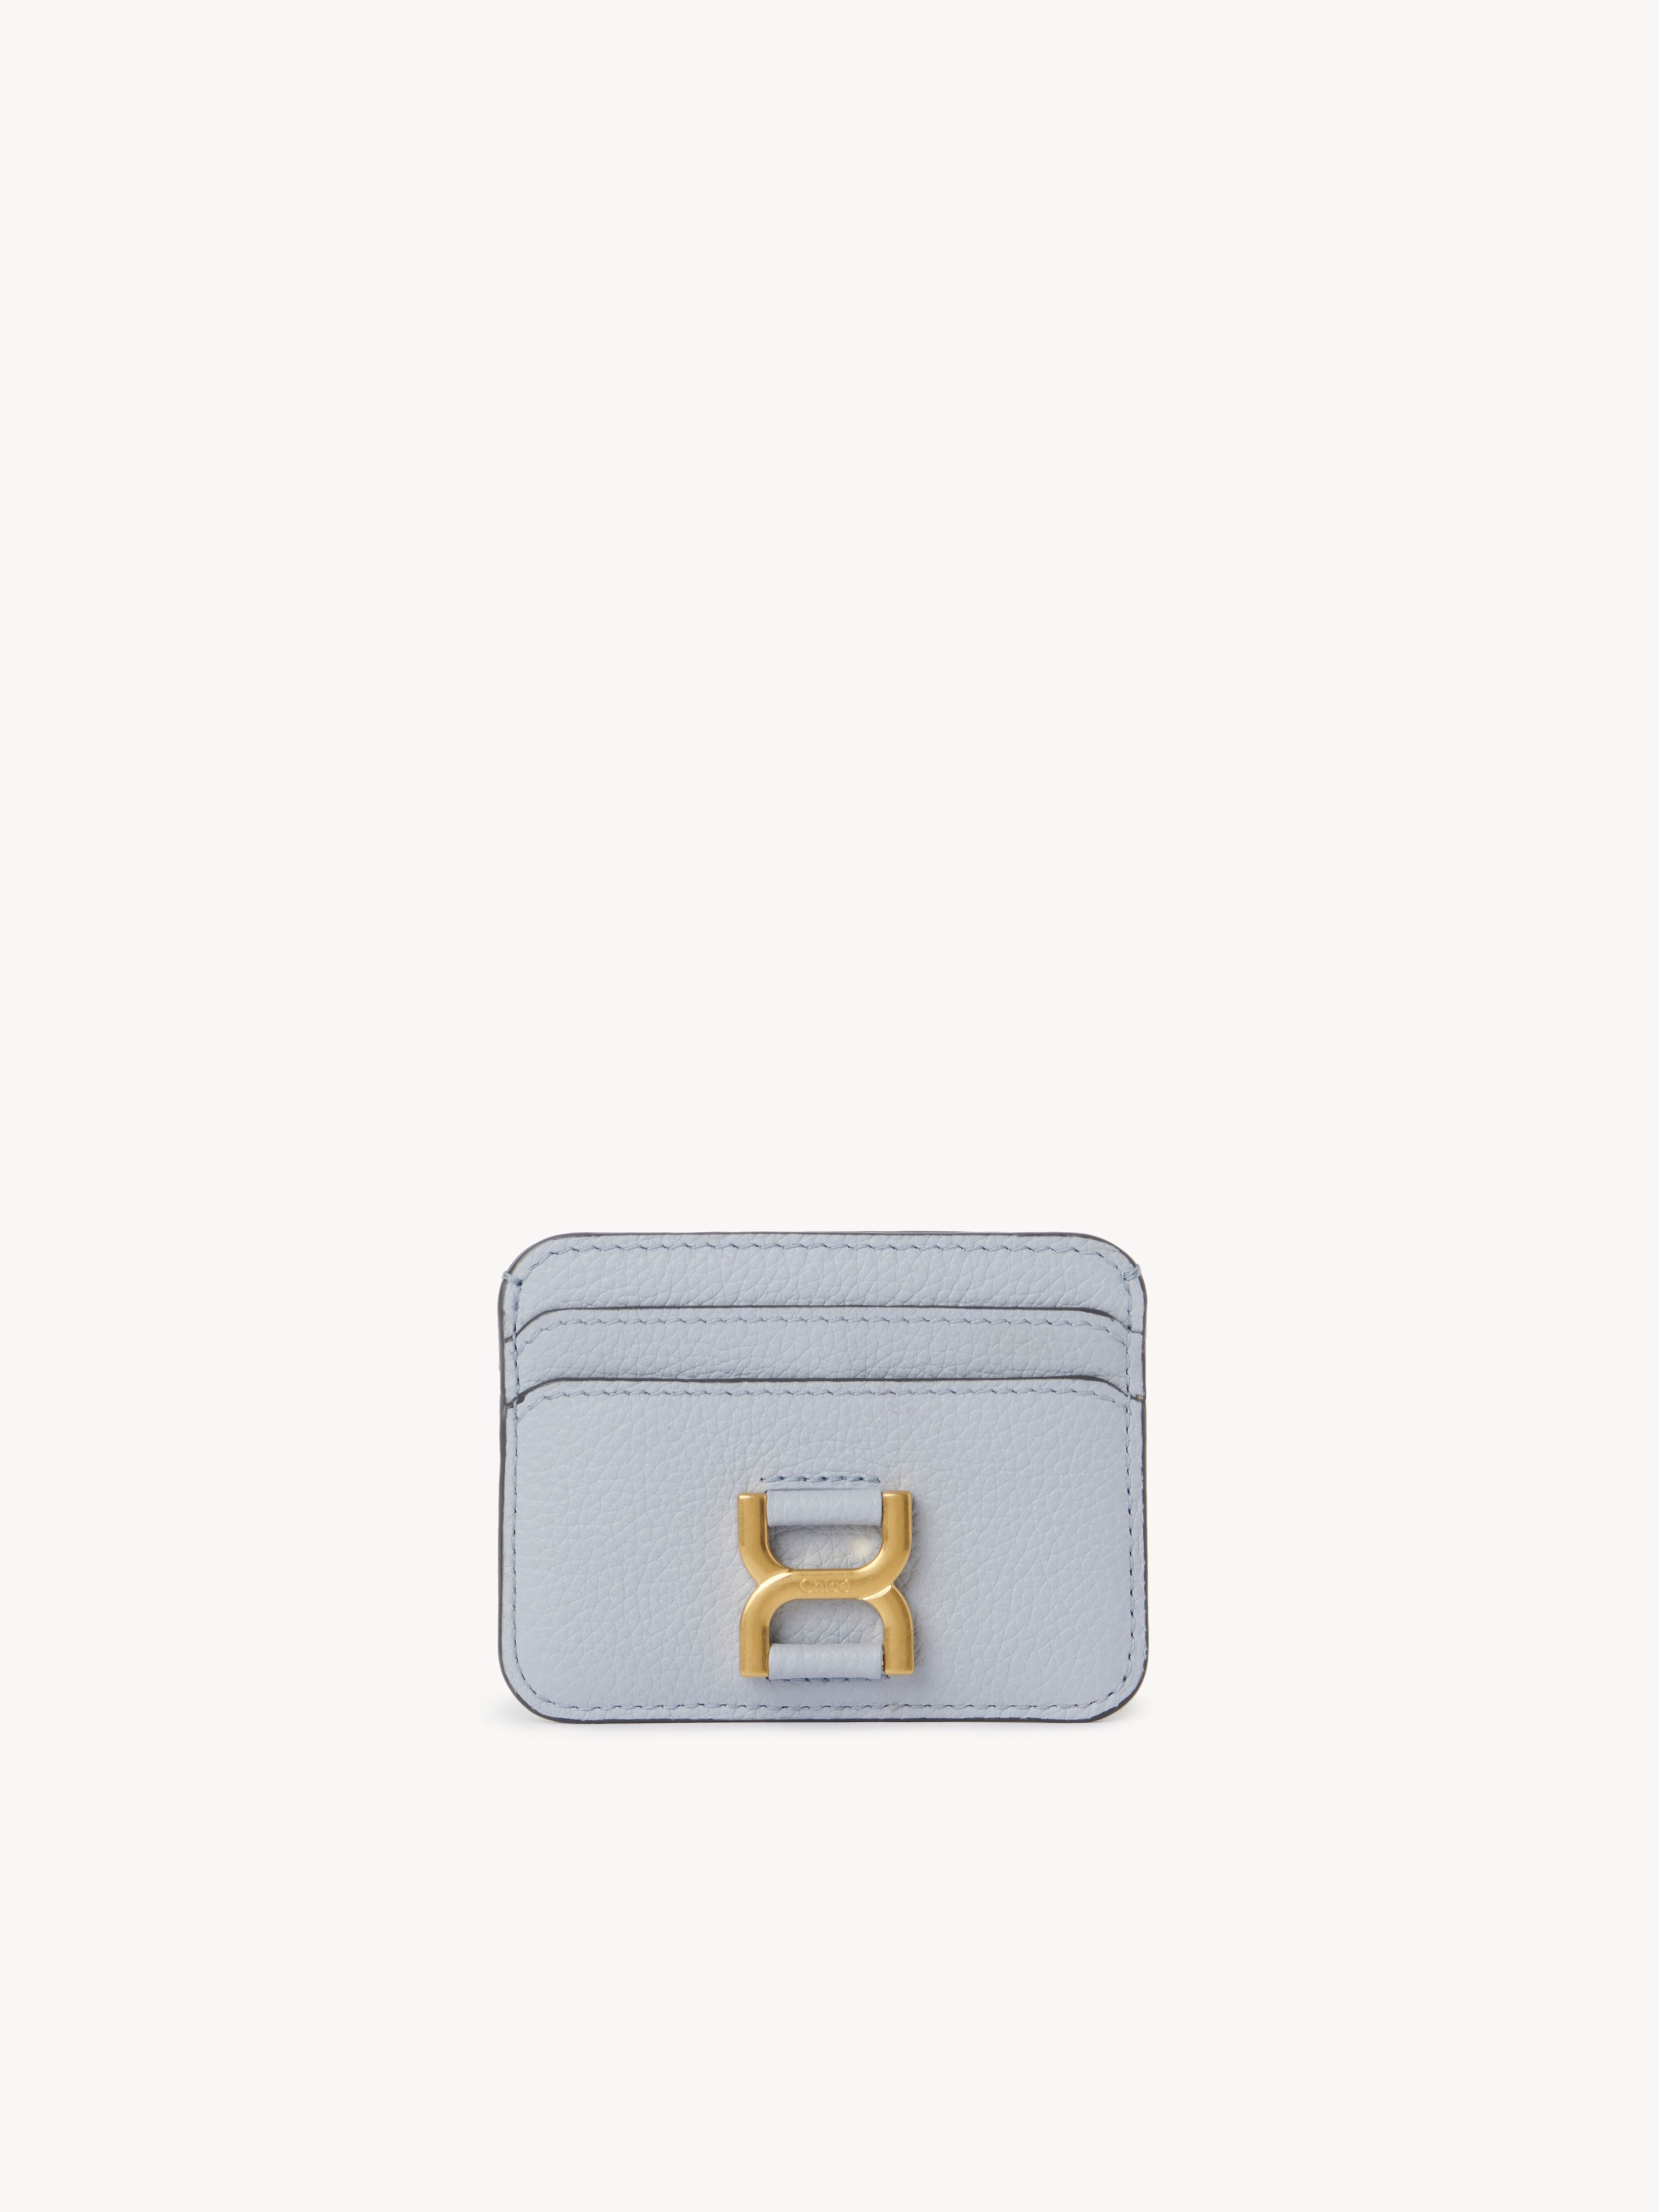 Chloé Marcie Card Holder In Grained Leather Blue Size Onesize 100% Calf-skin Leather